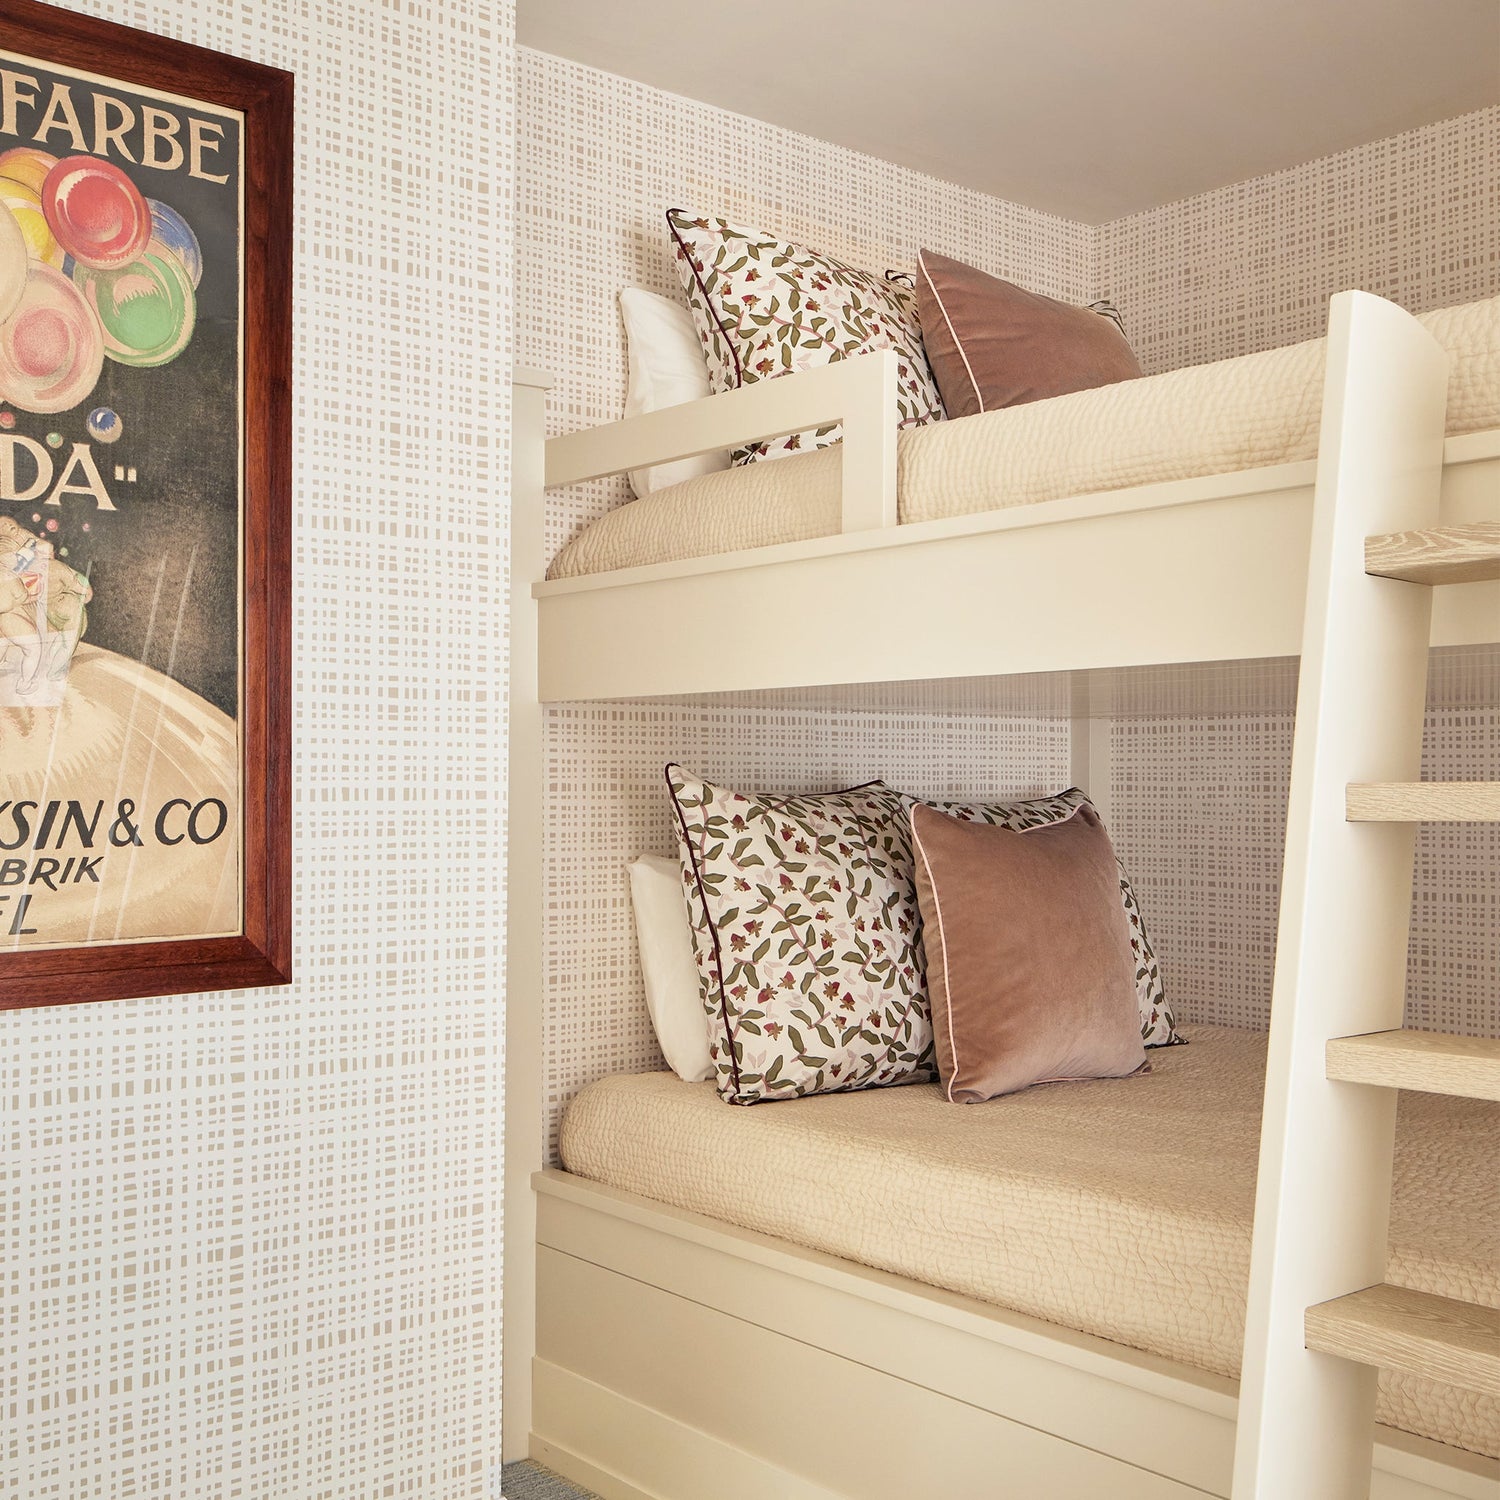 Bedroom corner styled with Beige Gingham Printed Wallpaper by bunk beds with a Strawberry & Botanical Printed Pillow and a Mauve Velvet Pillow on each